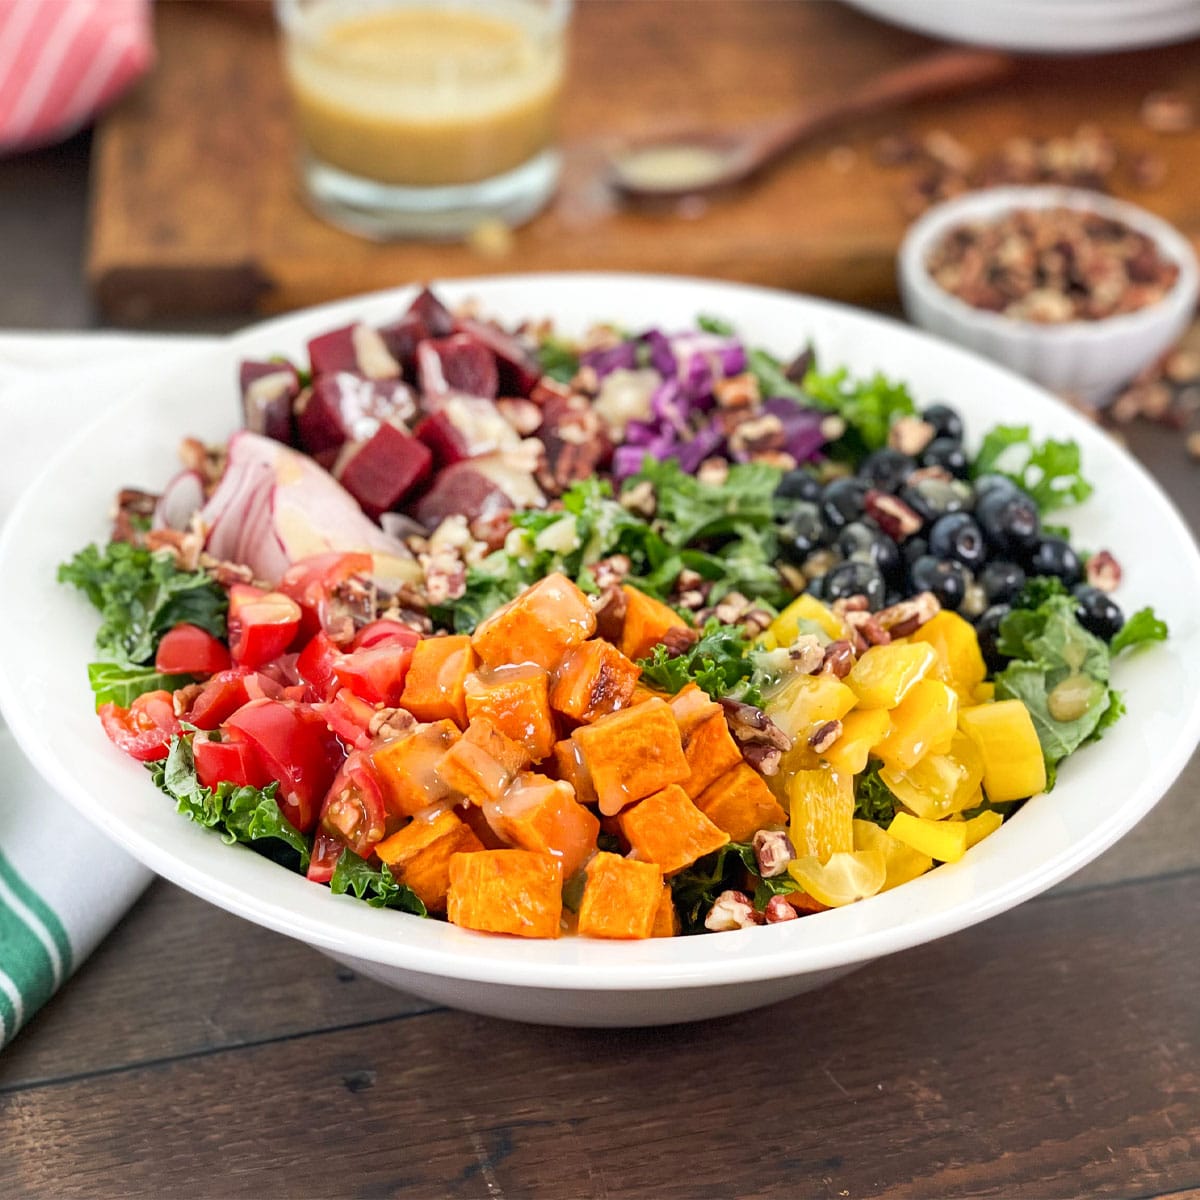 White bowl with a rainbow salad - bell pepper, sweet potato, tomatoes and more over kale.